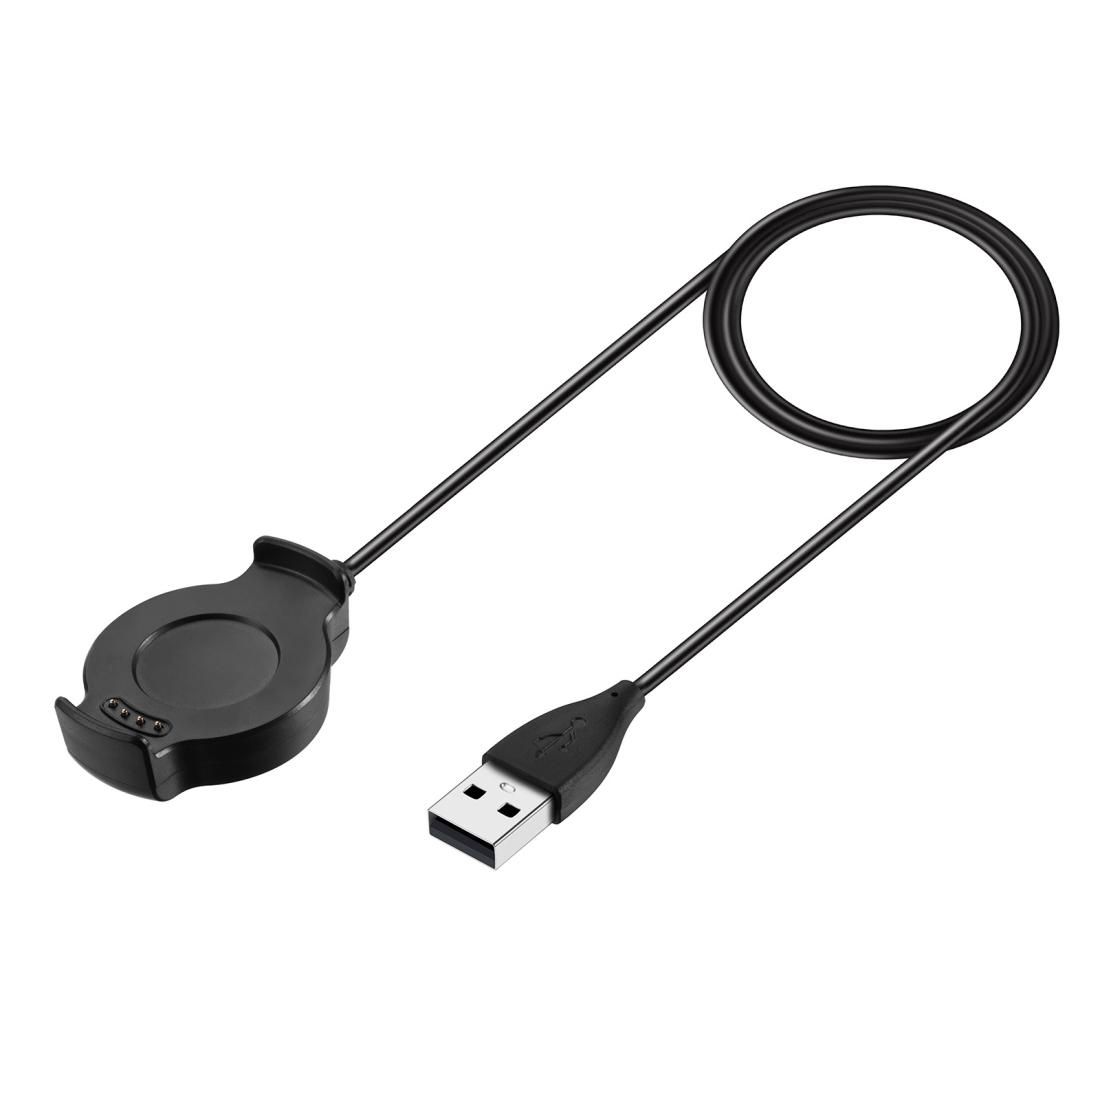 For Huawei watch2 Portable Replacement Cradle Charger (Black)